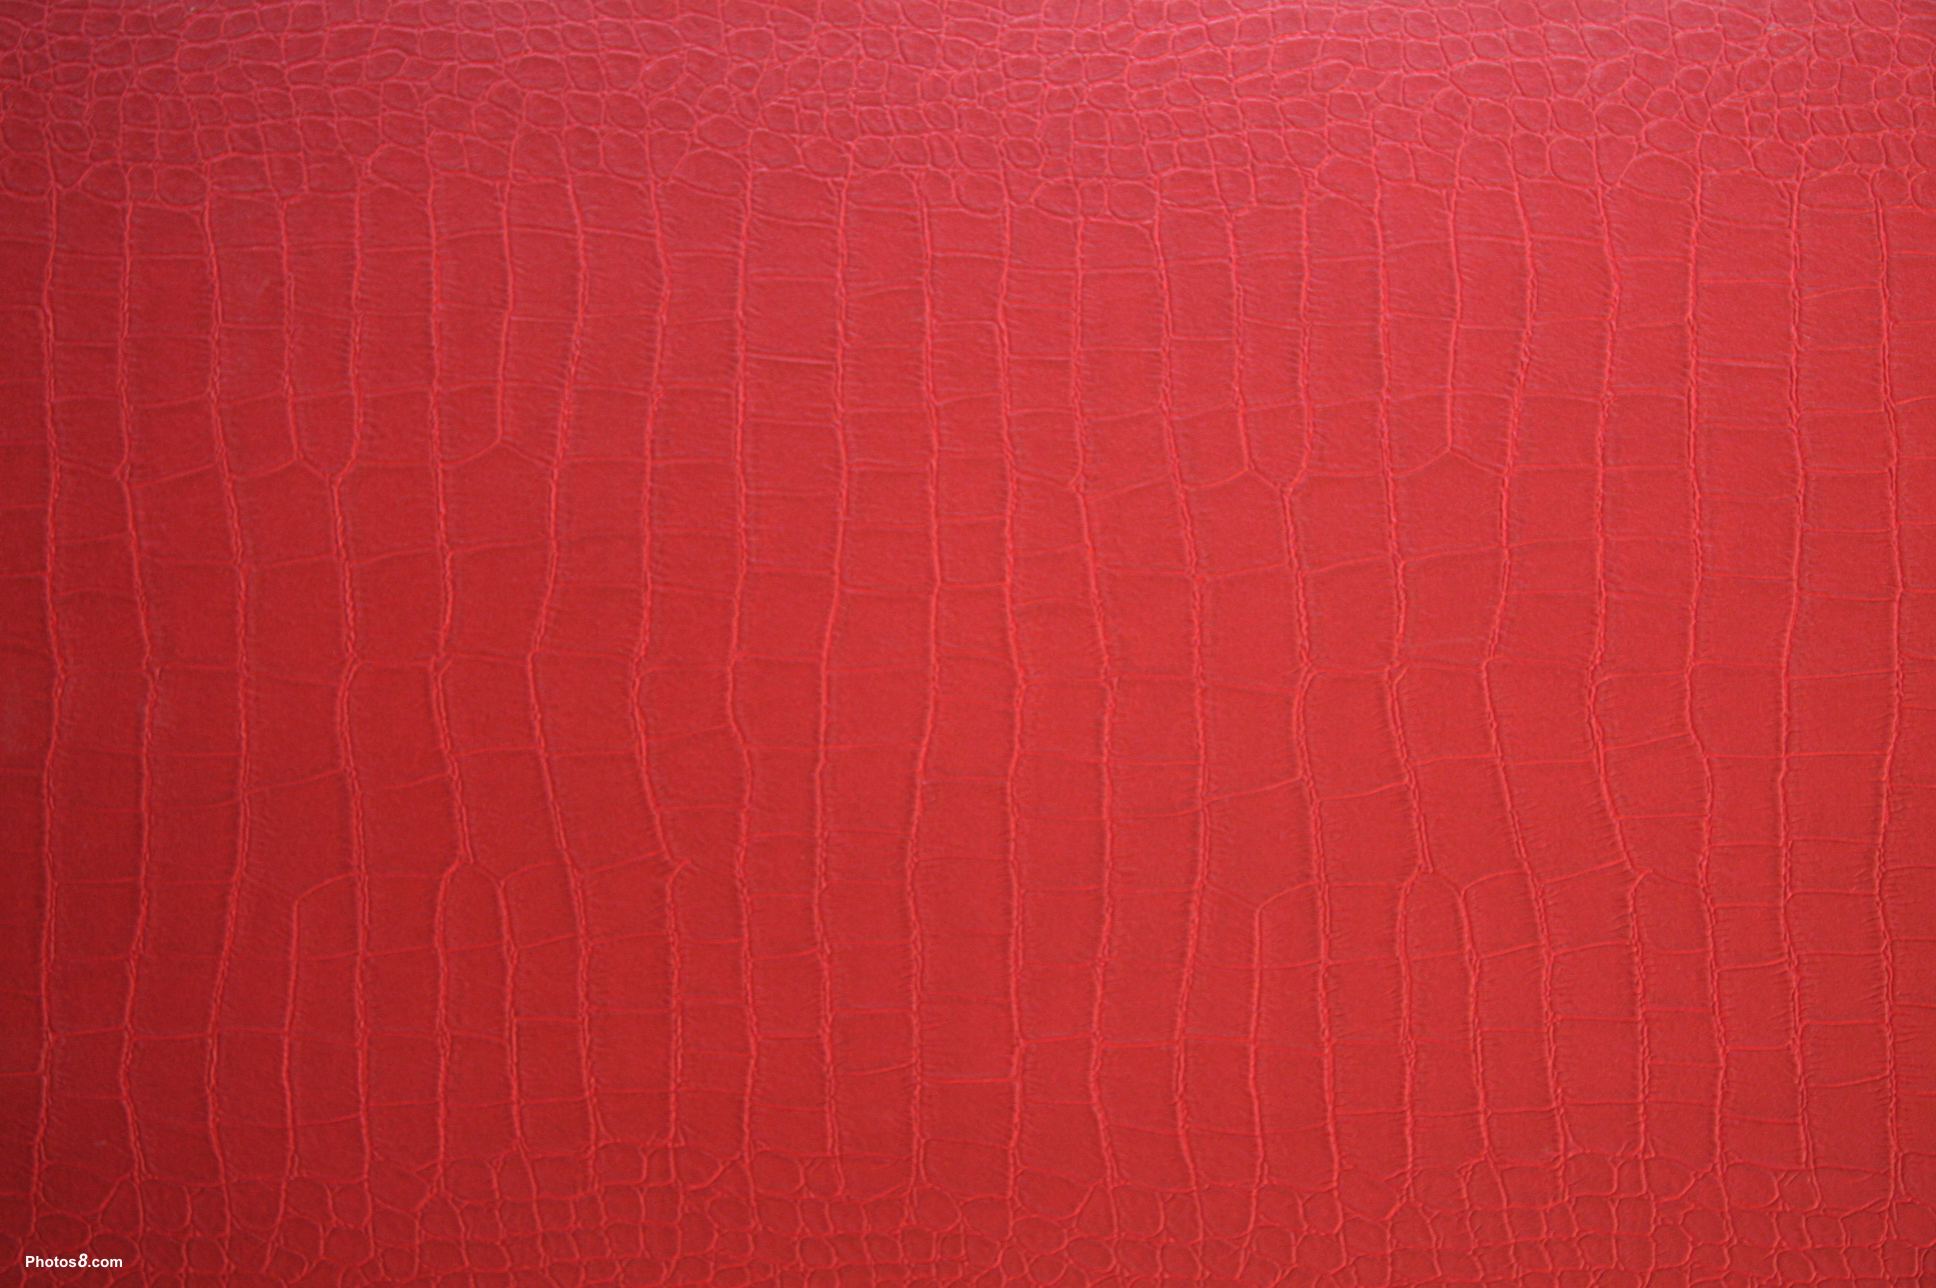 red leather texture, background, red leather background, leather background